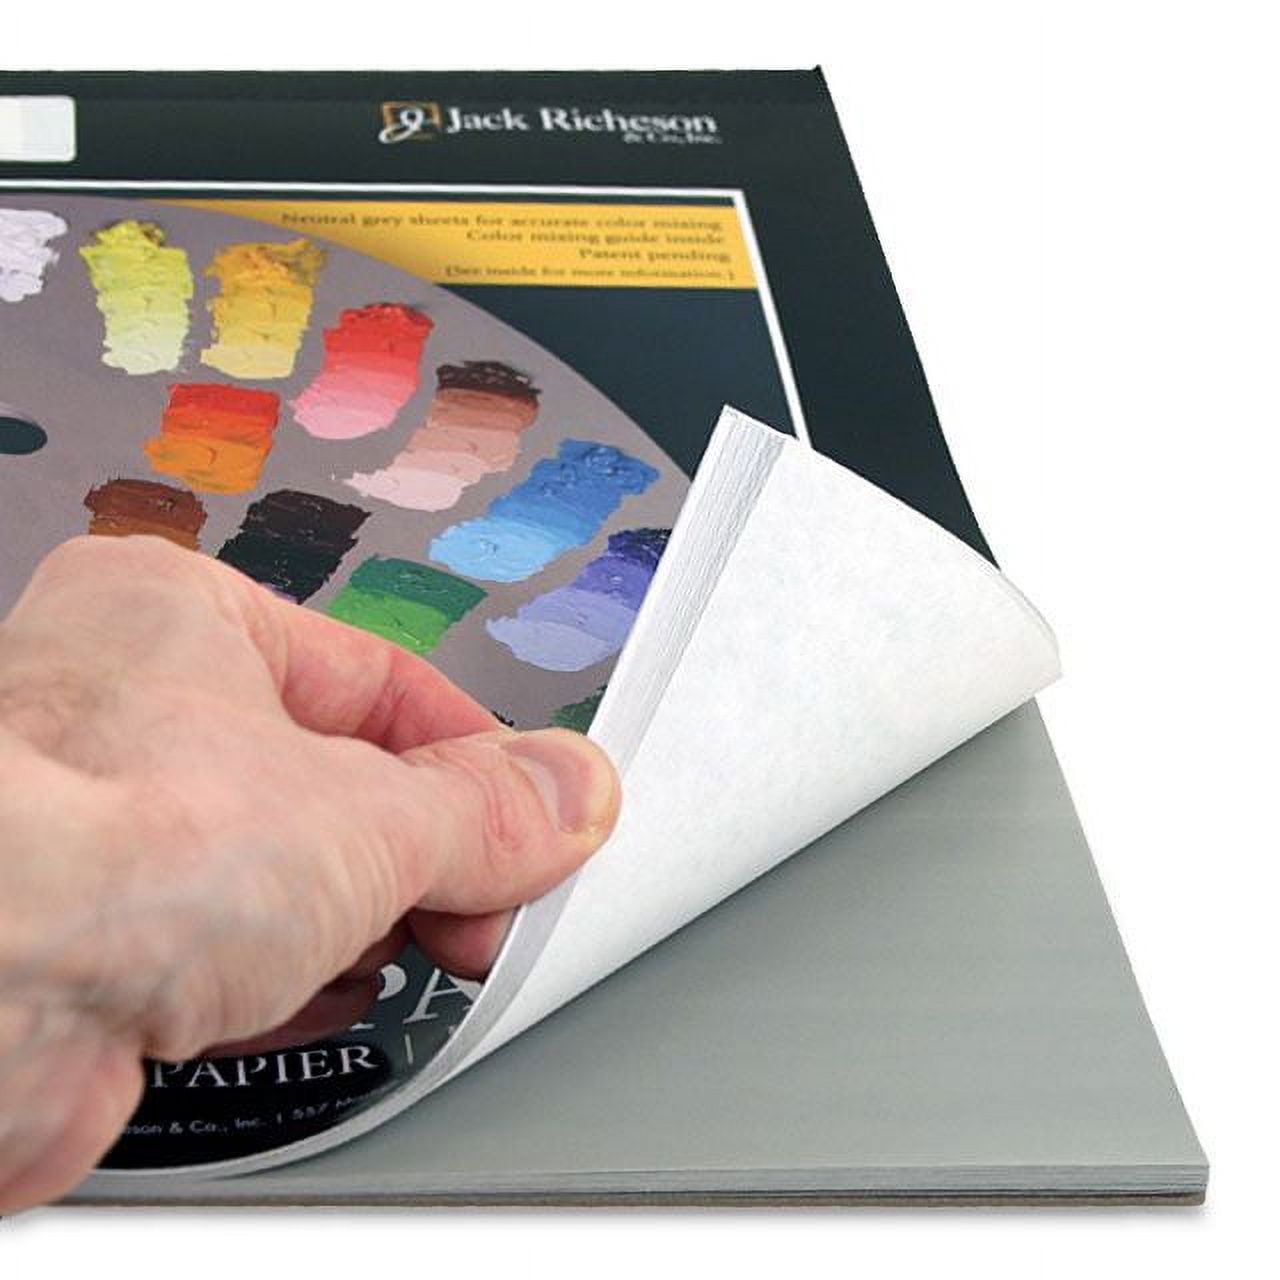 Blick Palette Paper Pad - 12 inch x 16 inch, 50 Sheets